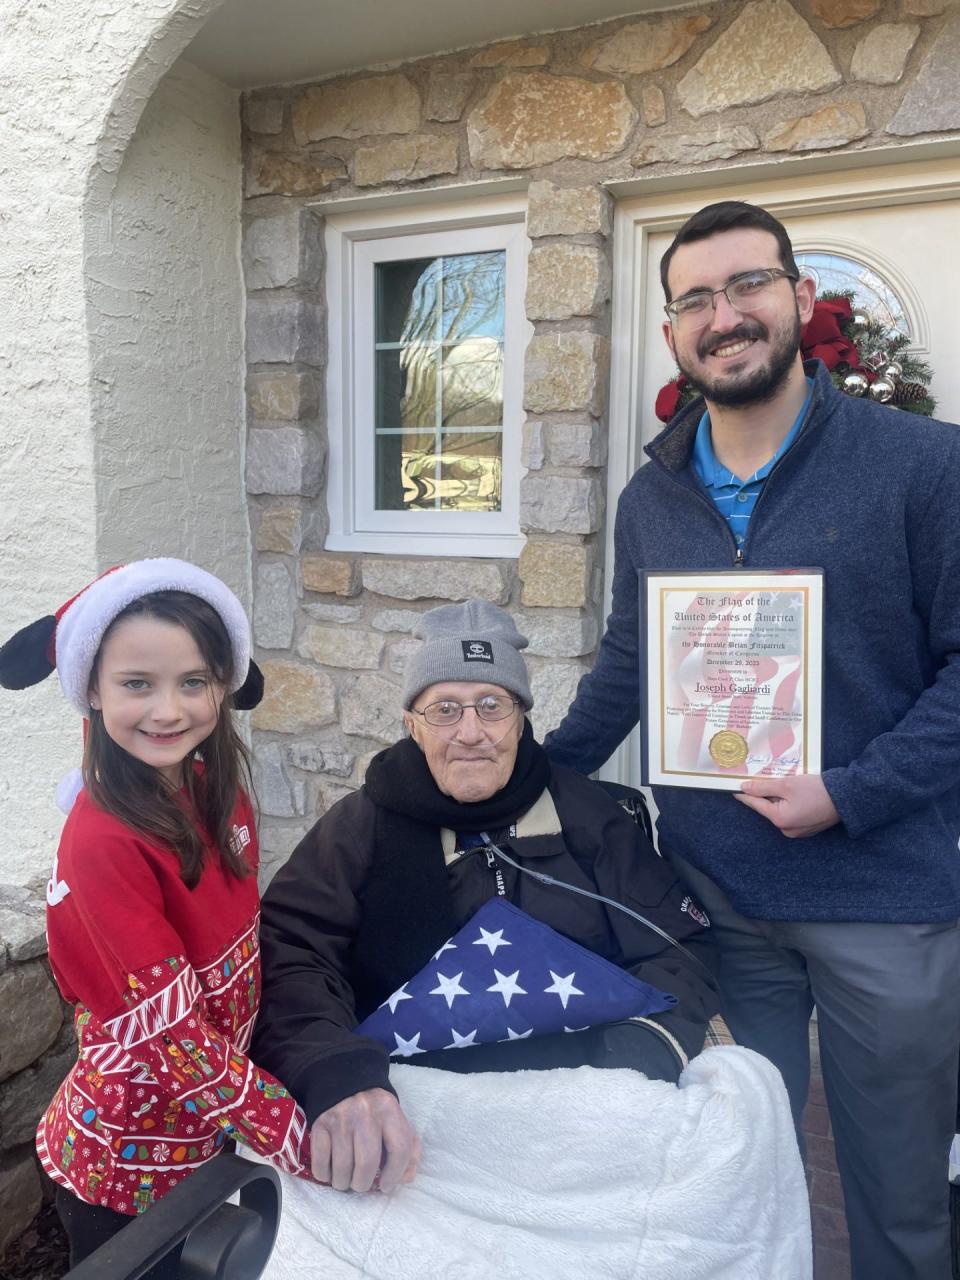 Centenarian Joseph Gagliardi of Newtown Township, a World War II veteran, accepts an American flag and proclamation from Brendan McCusker, a constituent advocate for Congressman Brian Fitzpatrick, as Layla Leuthy Peck, 7, watches. Layla also presented the veteran with 100 birthday cards to mark his special birthday Friday.